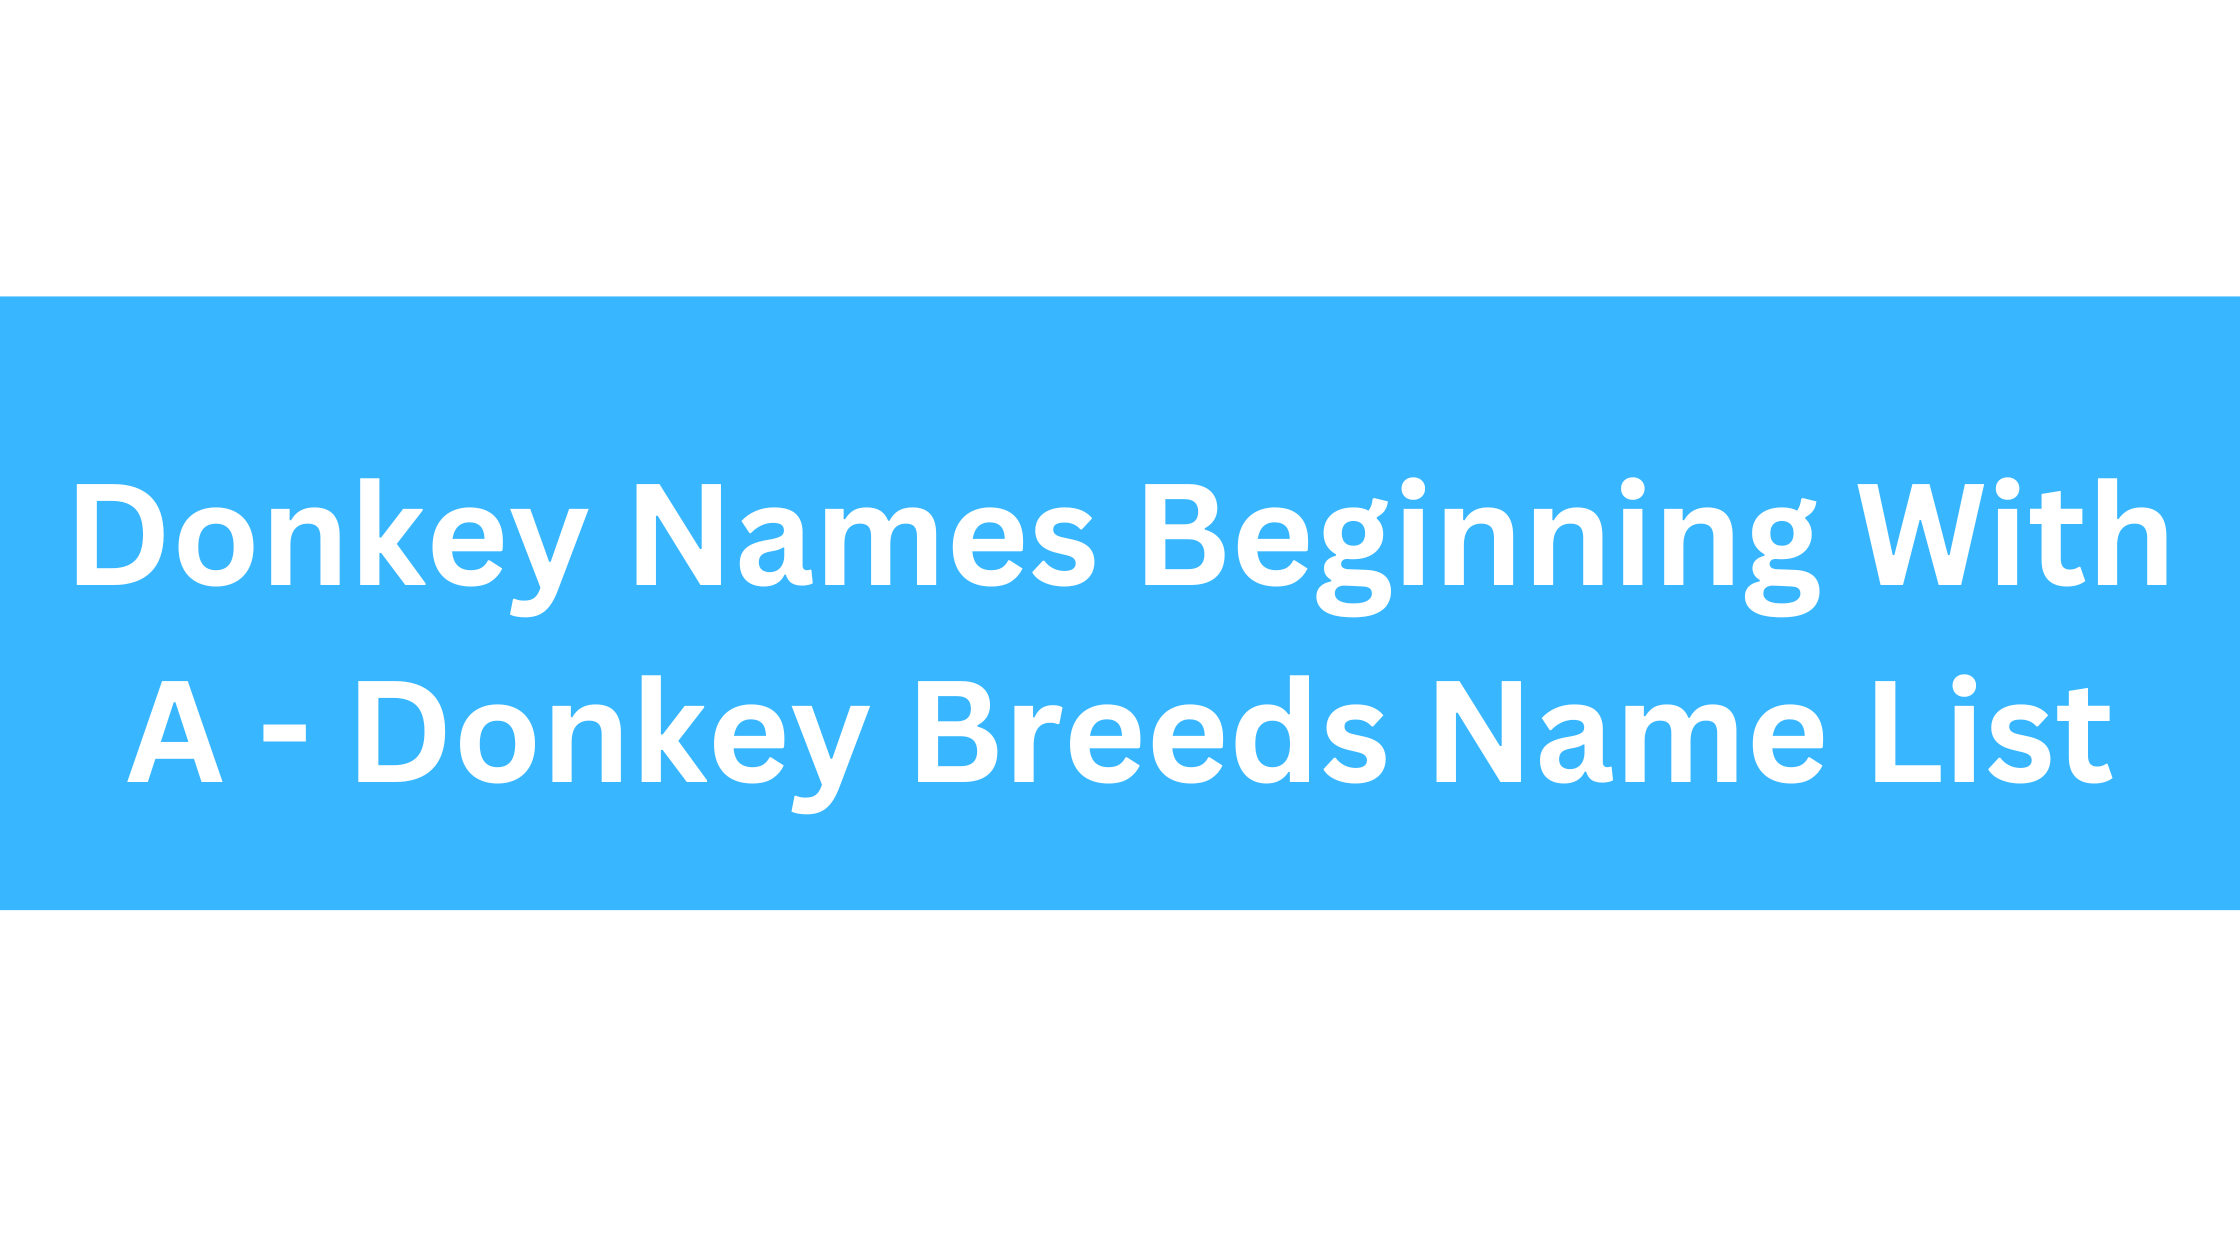 Donkey Names Beginning With A